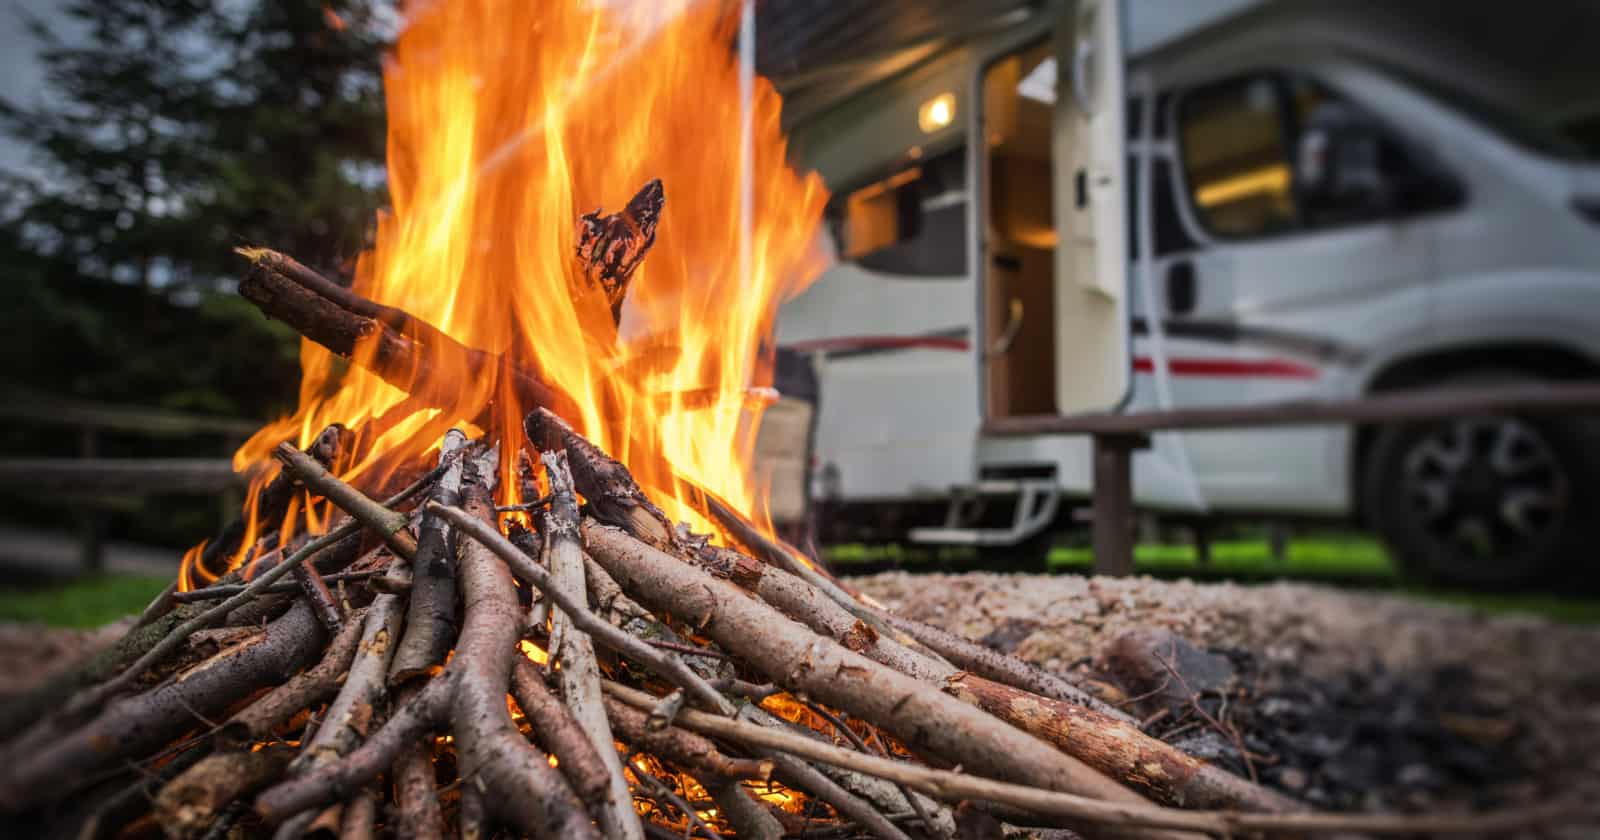 campfire and RV in one of the cheap camping sites